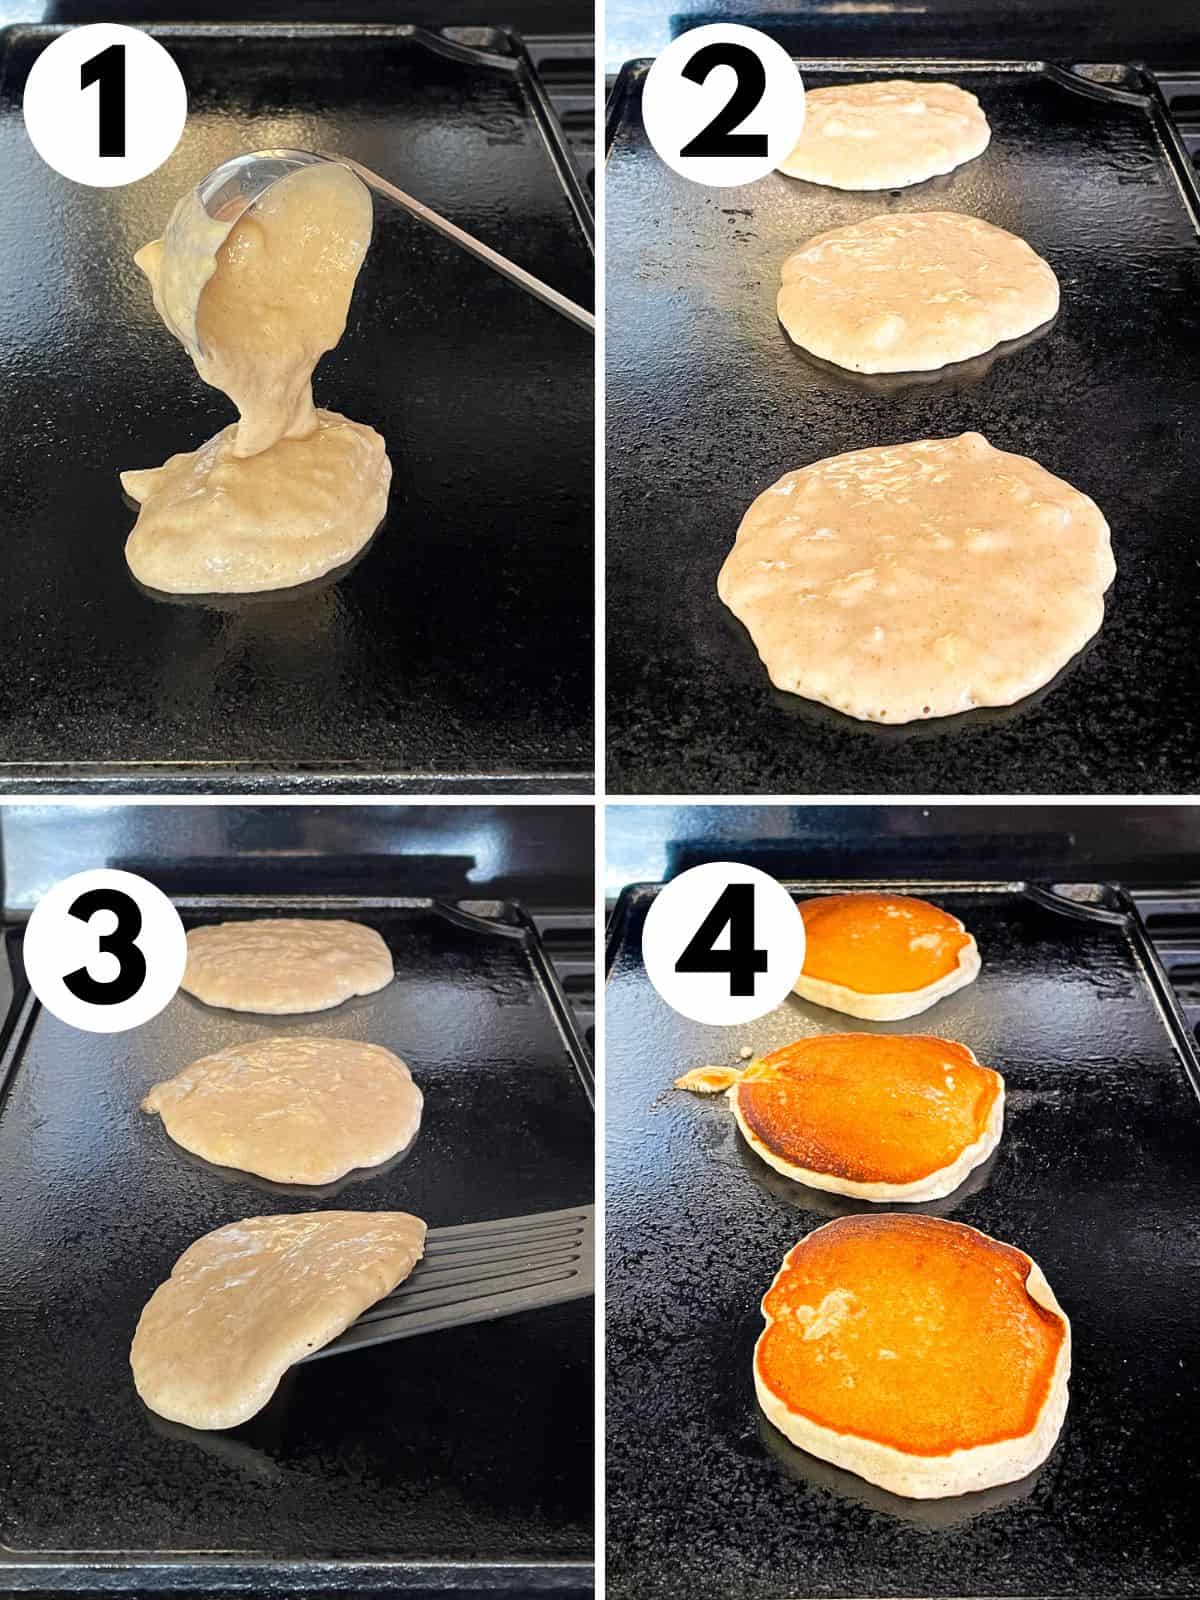 Cooking gluten-free banana pancakes on a griddle. 1. Ladling batter onto griddle. 2. Pancakes cooking. 3. Flipping the pancakes. 4. Three brown pancakes on the griddle.